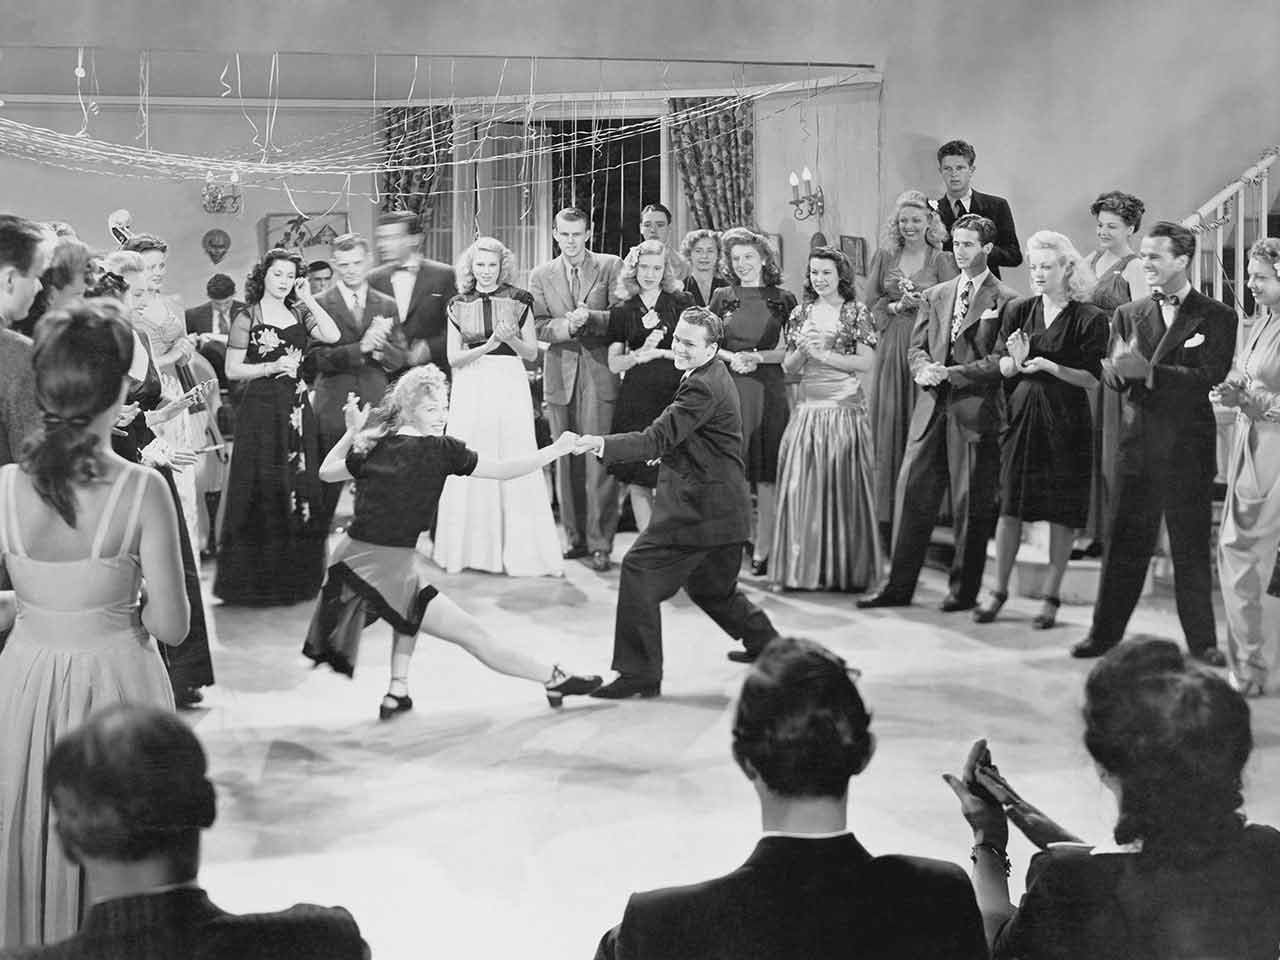 A couple swing dancing, a type of dance from the 1940s